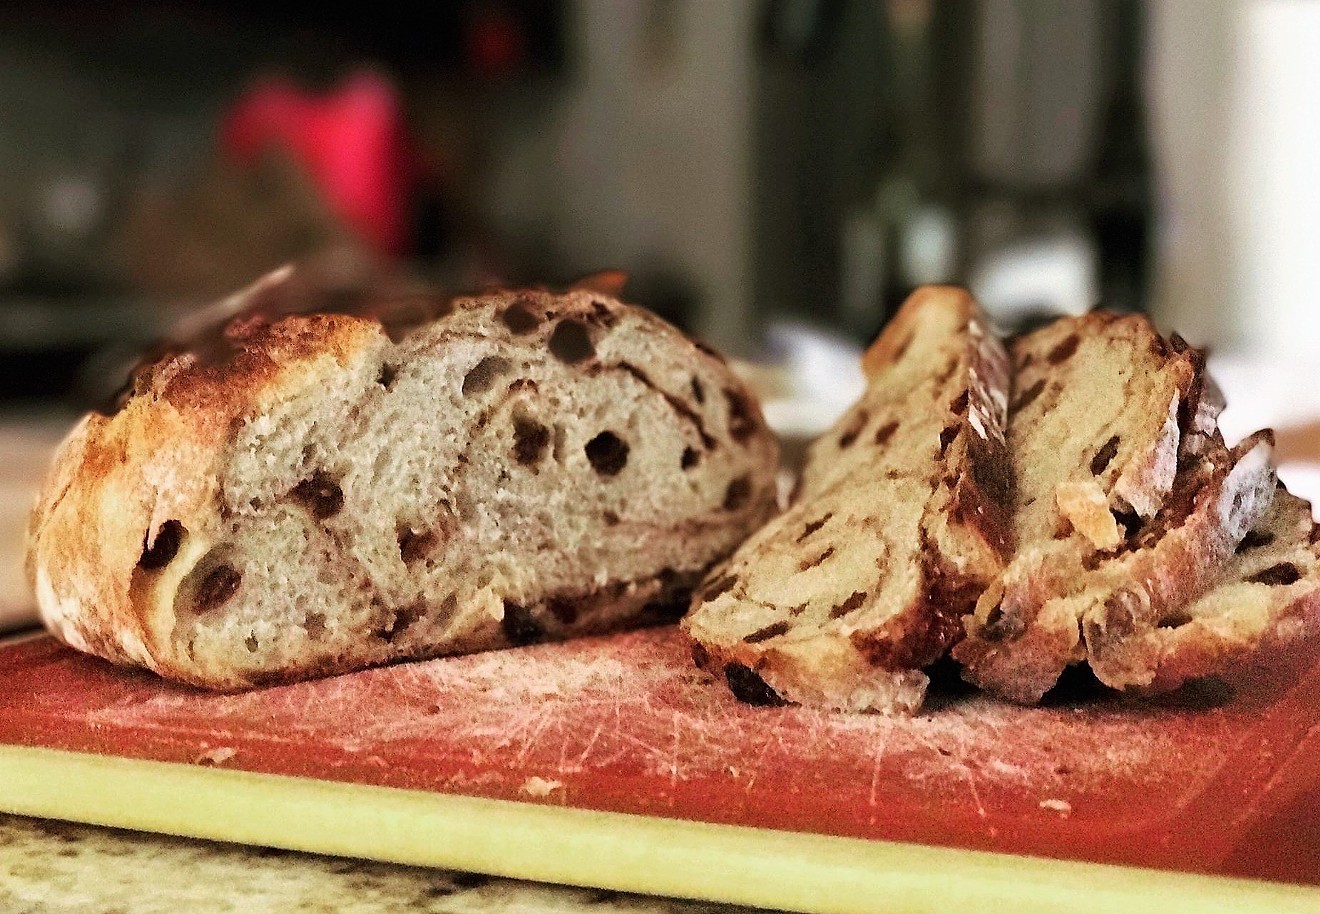 The cinnamon raisin in loaf or boule form, is one of the most popular breads at The Bread Man Baking Company.